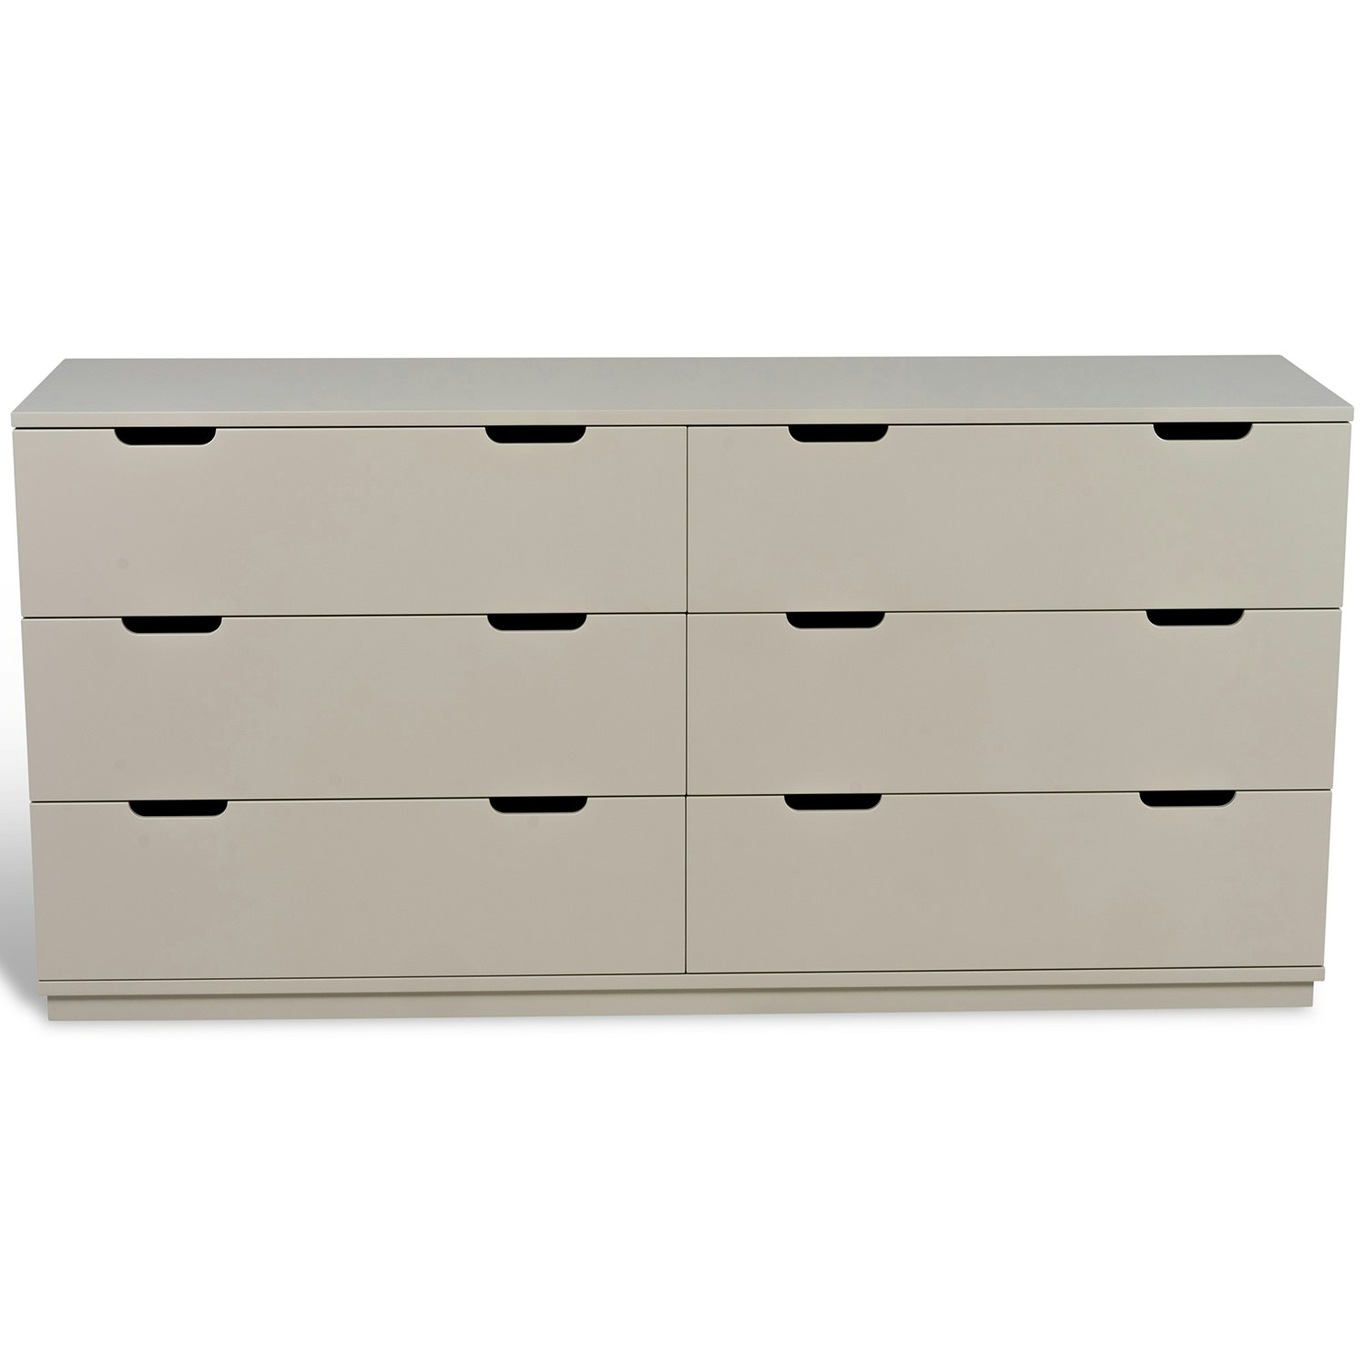 Aoko Chest Of Drawers With 6 Drawers, Beige